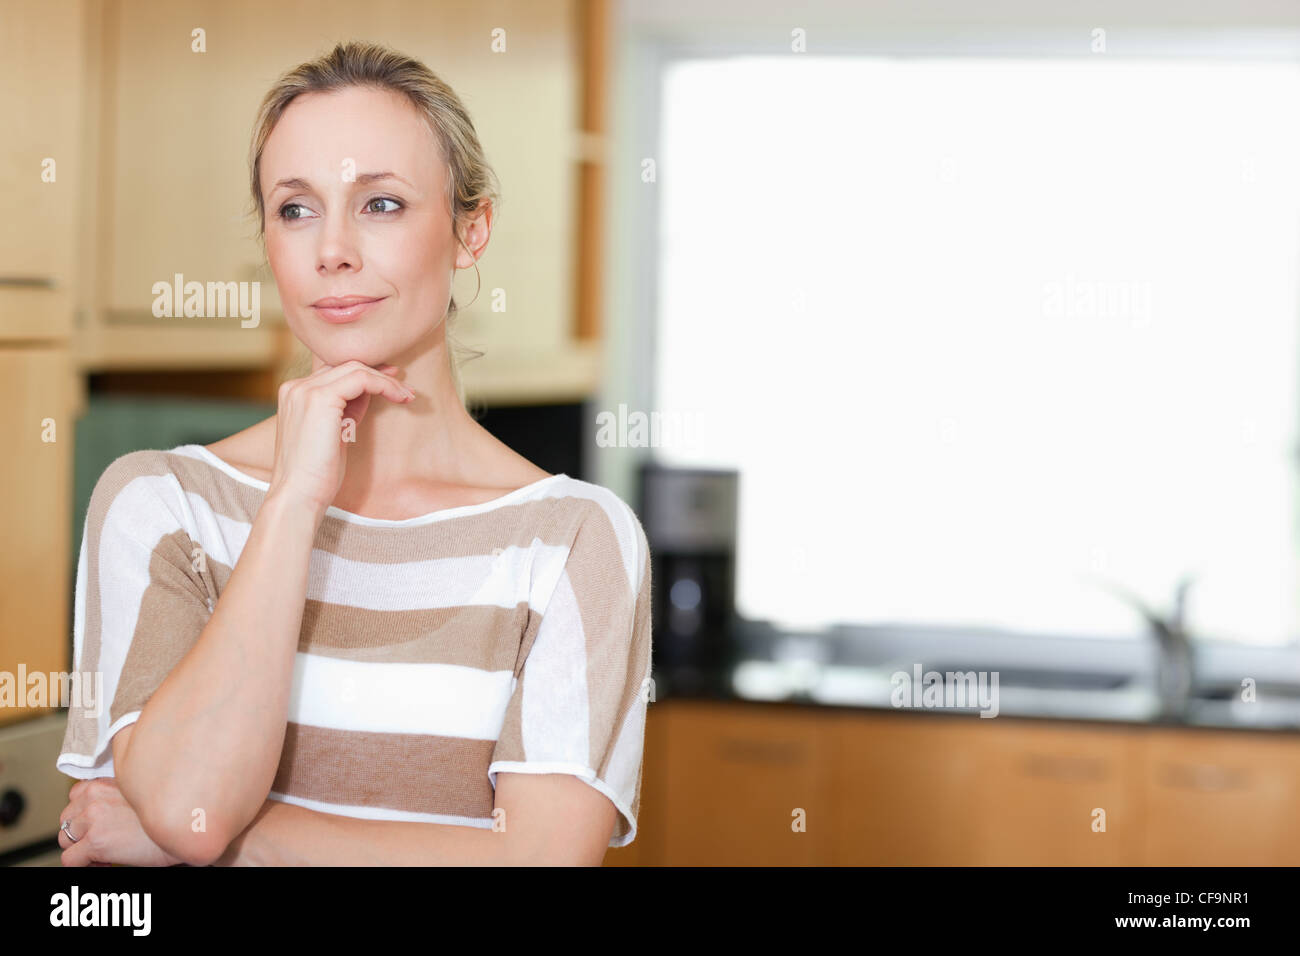 Thoughtful woman standing in kitchen Banque D'Images